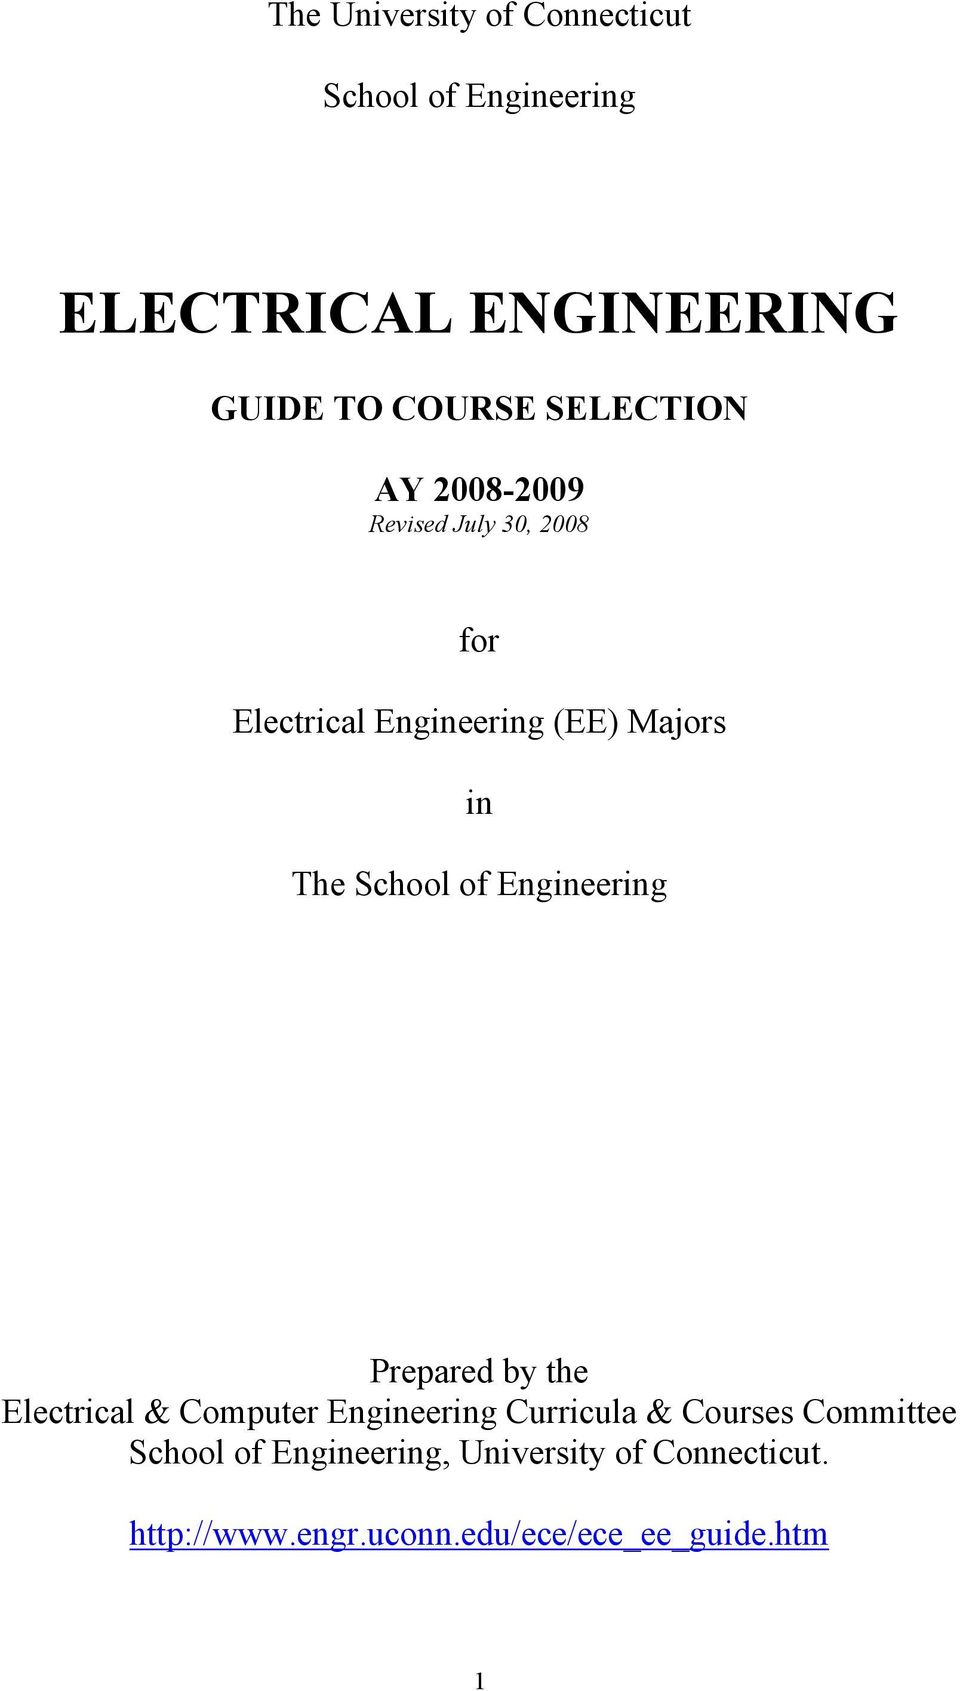 School of Engineering Prepared by the Electrical & Computer Engineering Curricula & Courses